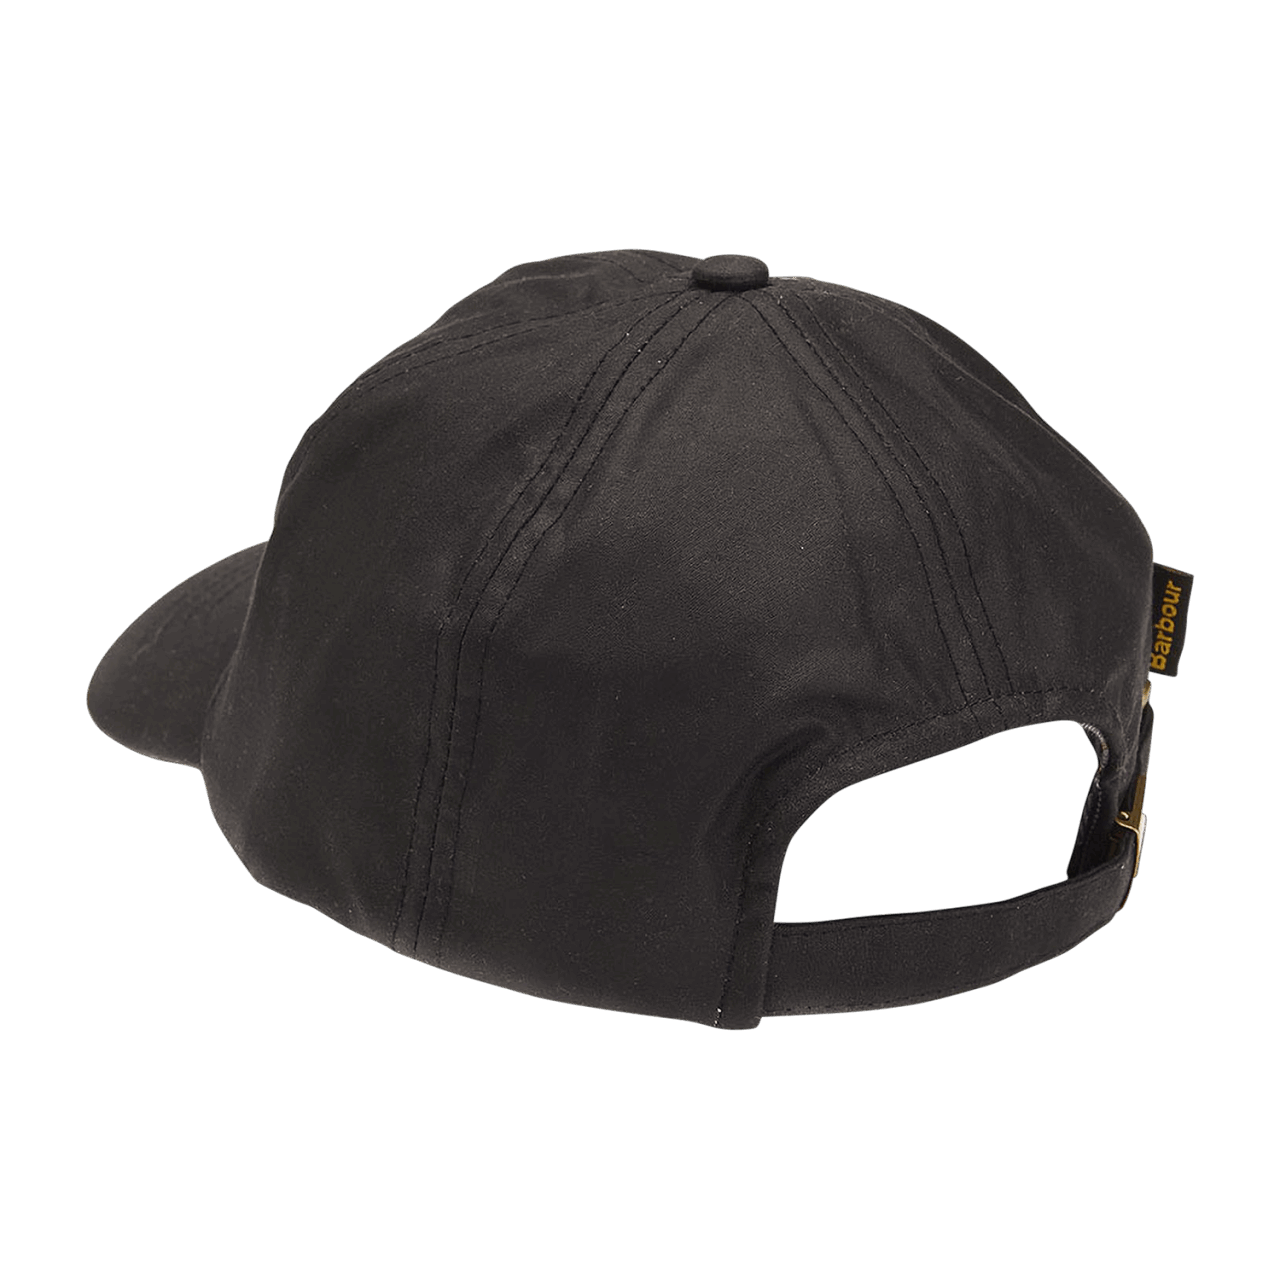 Barbour Waxed Sports Cap - black